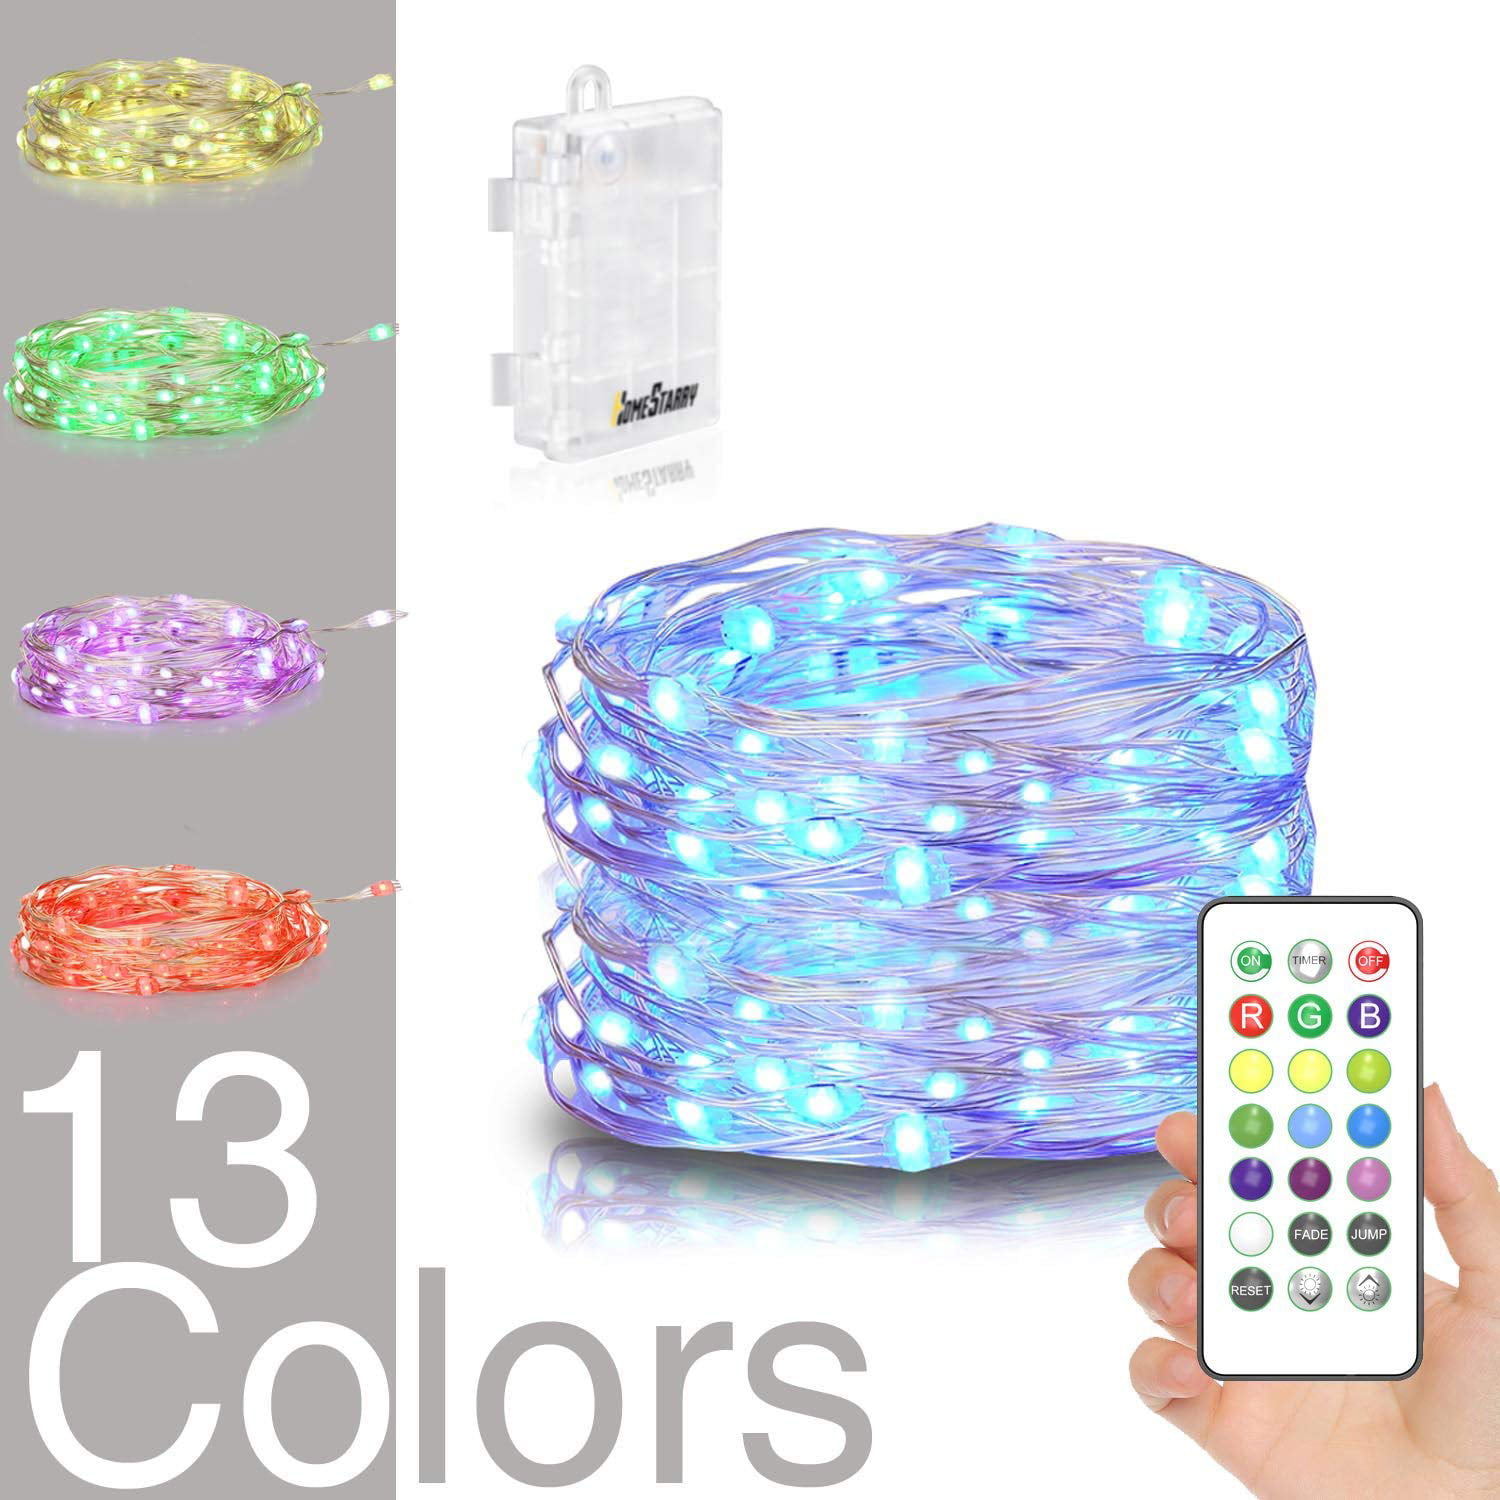 Led String Lights Battery Powered Multi Color Changing String Lights With Remote 50leds Indoor Decorative Silver Wire Lights For Bedroom Patio Outdoor Garden Stroller Christmas Tree 16ft Walmart Com Walmart Com